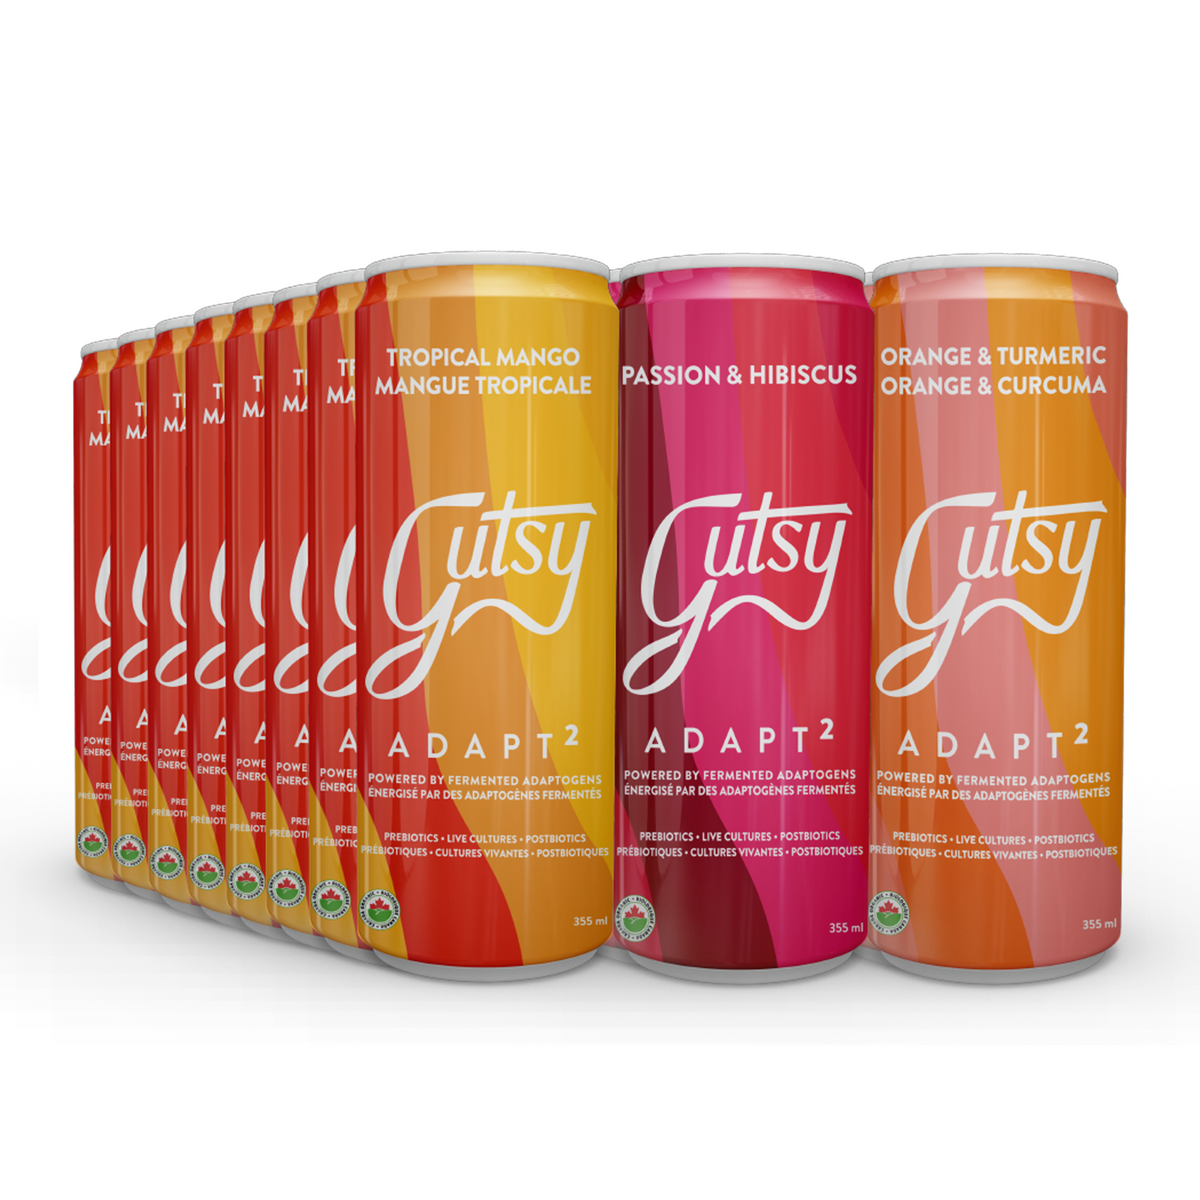 ADAPT²  | DISCOVERY PACKAGE | 24 PACK x 355ml